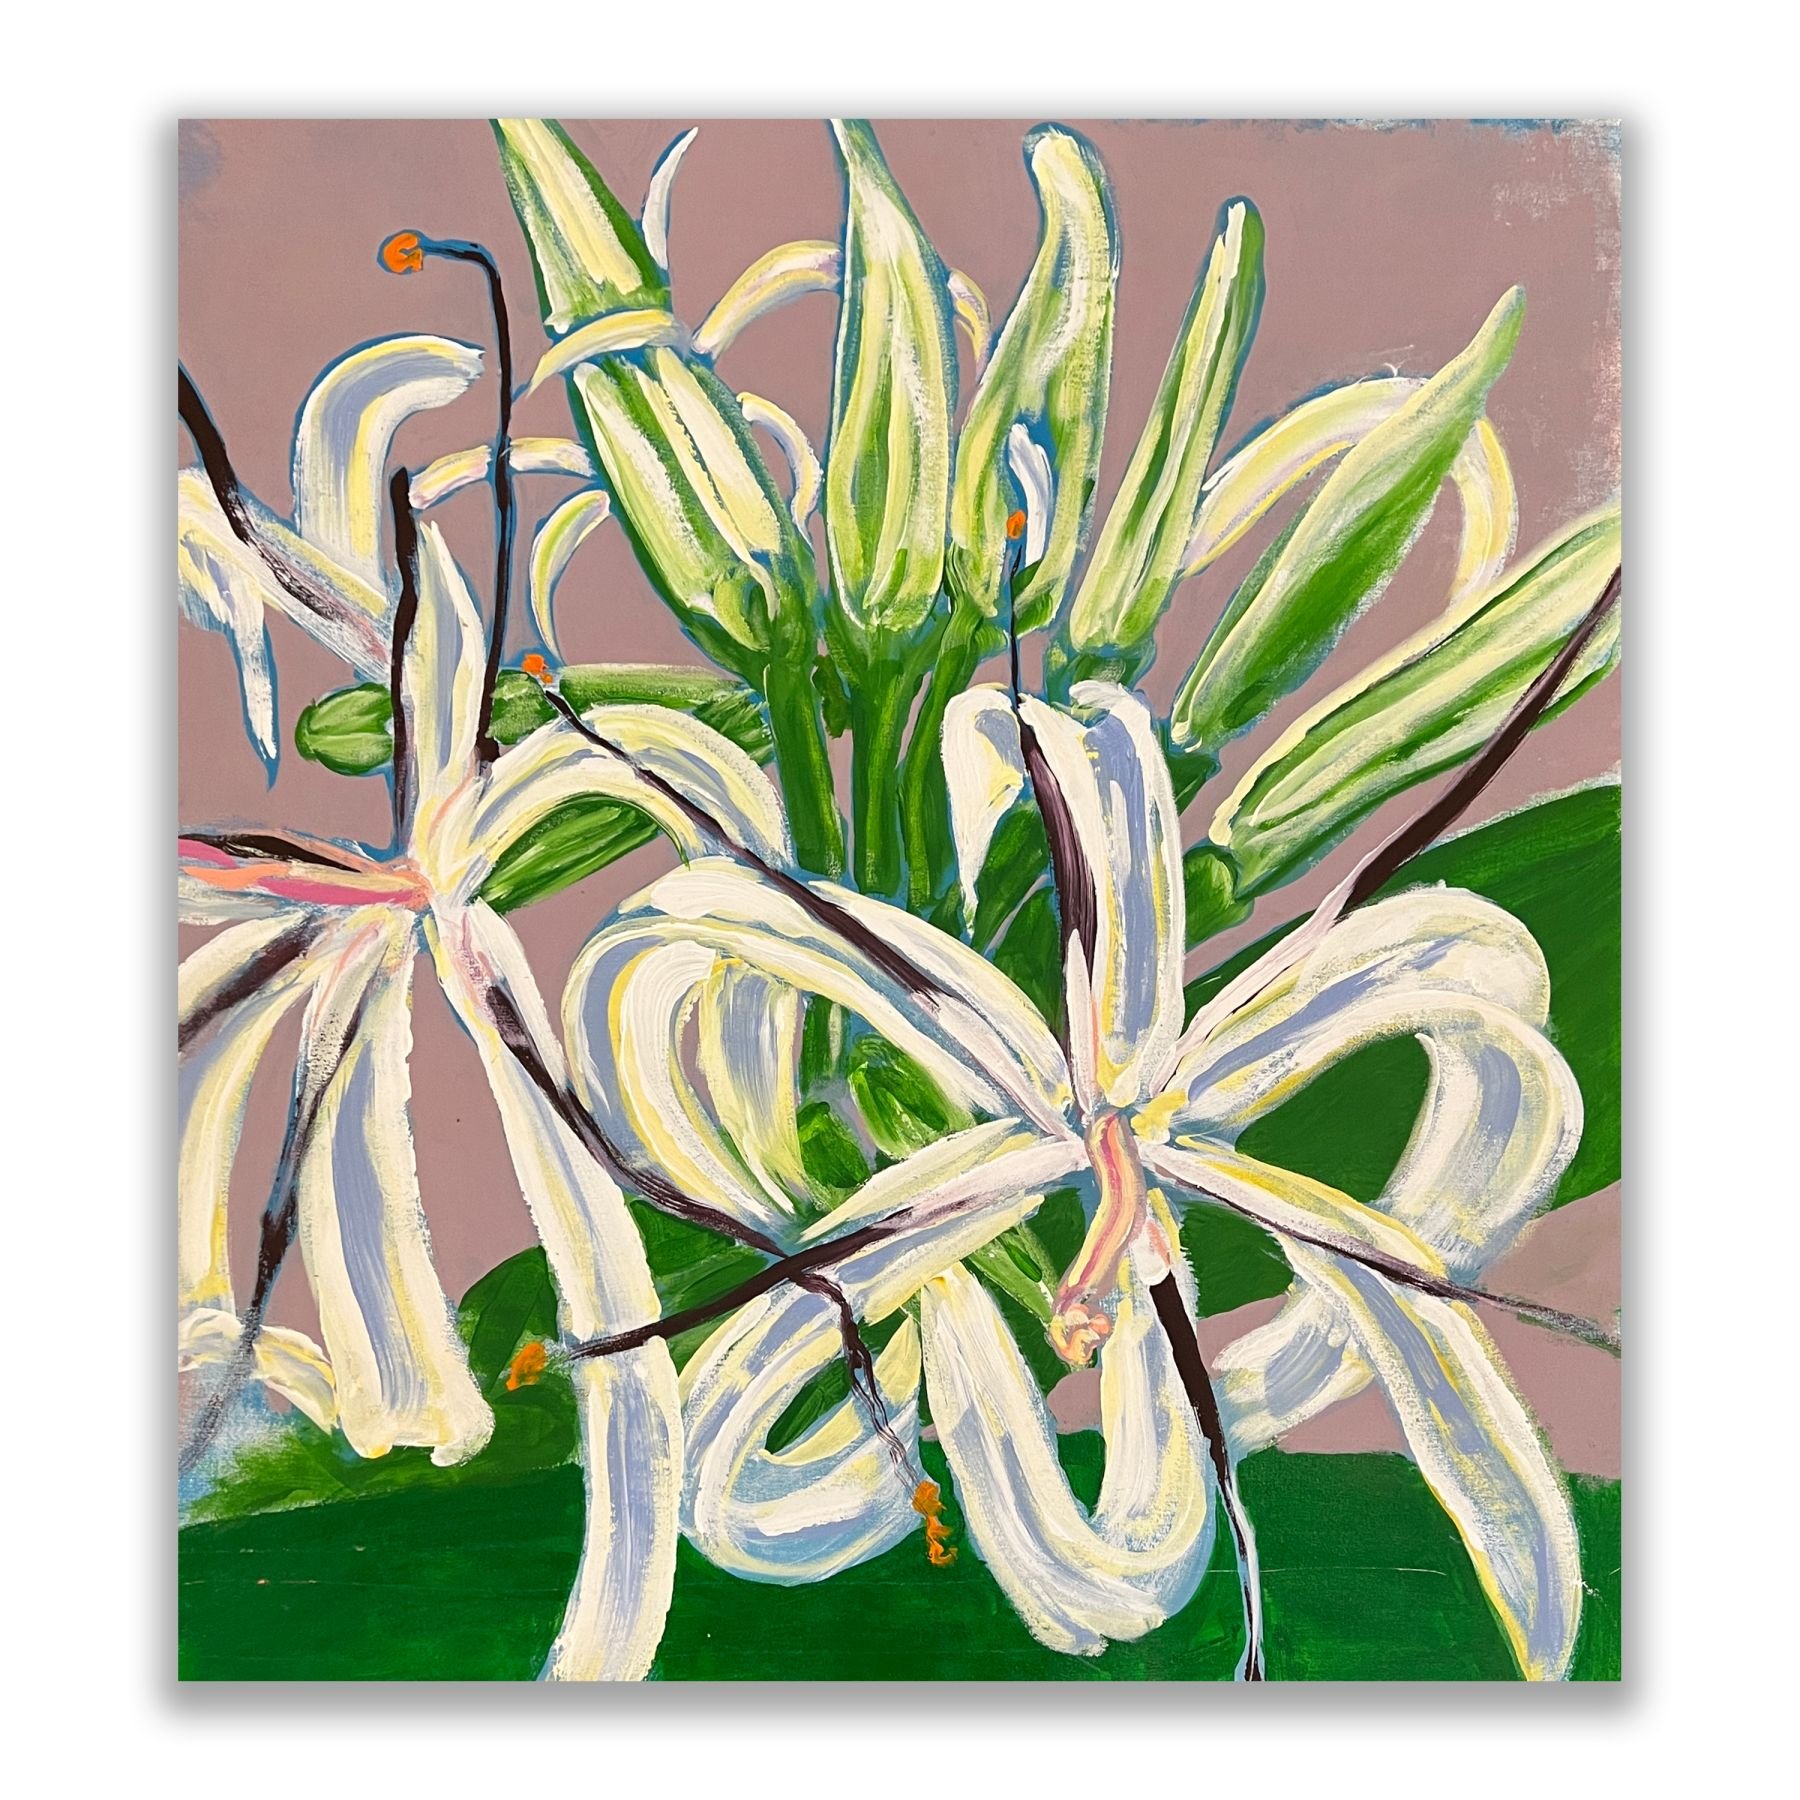 Spider Lily, 36x36"